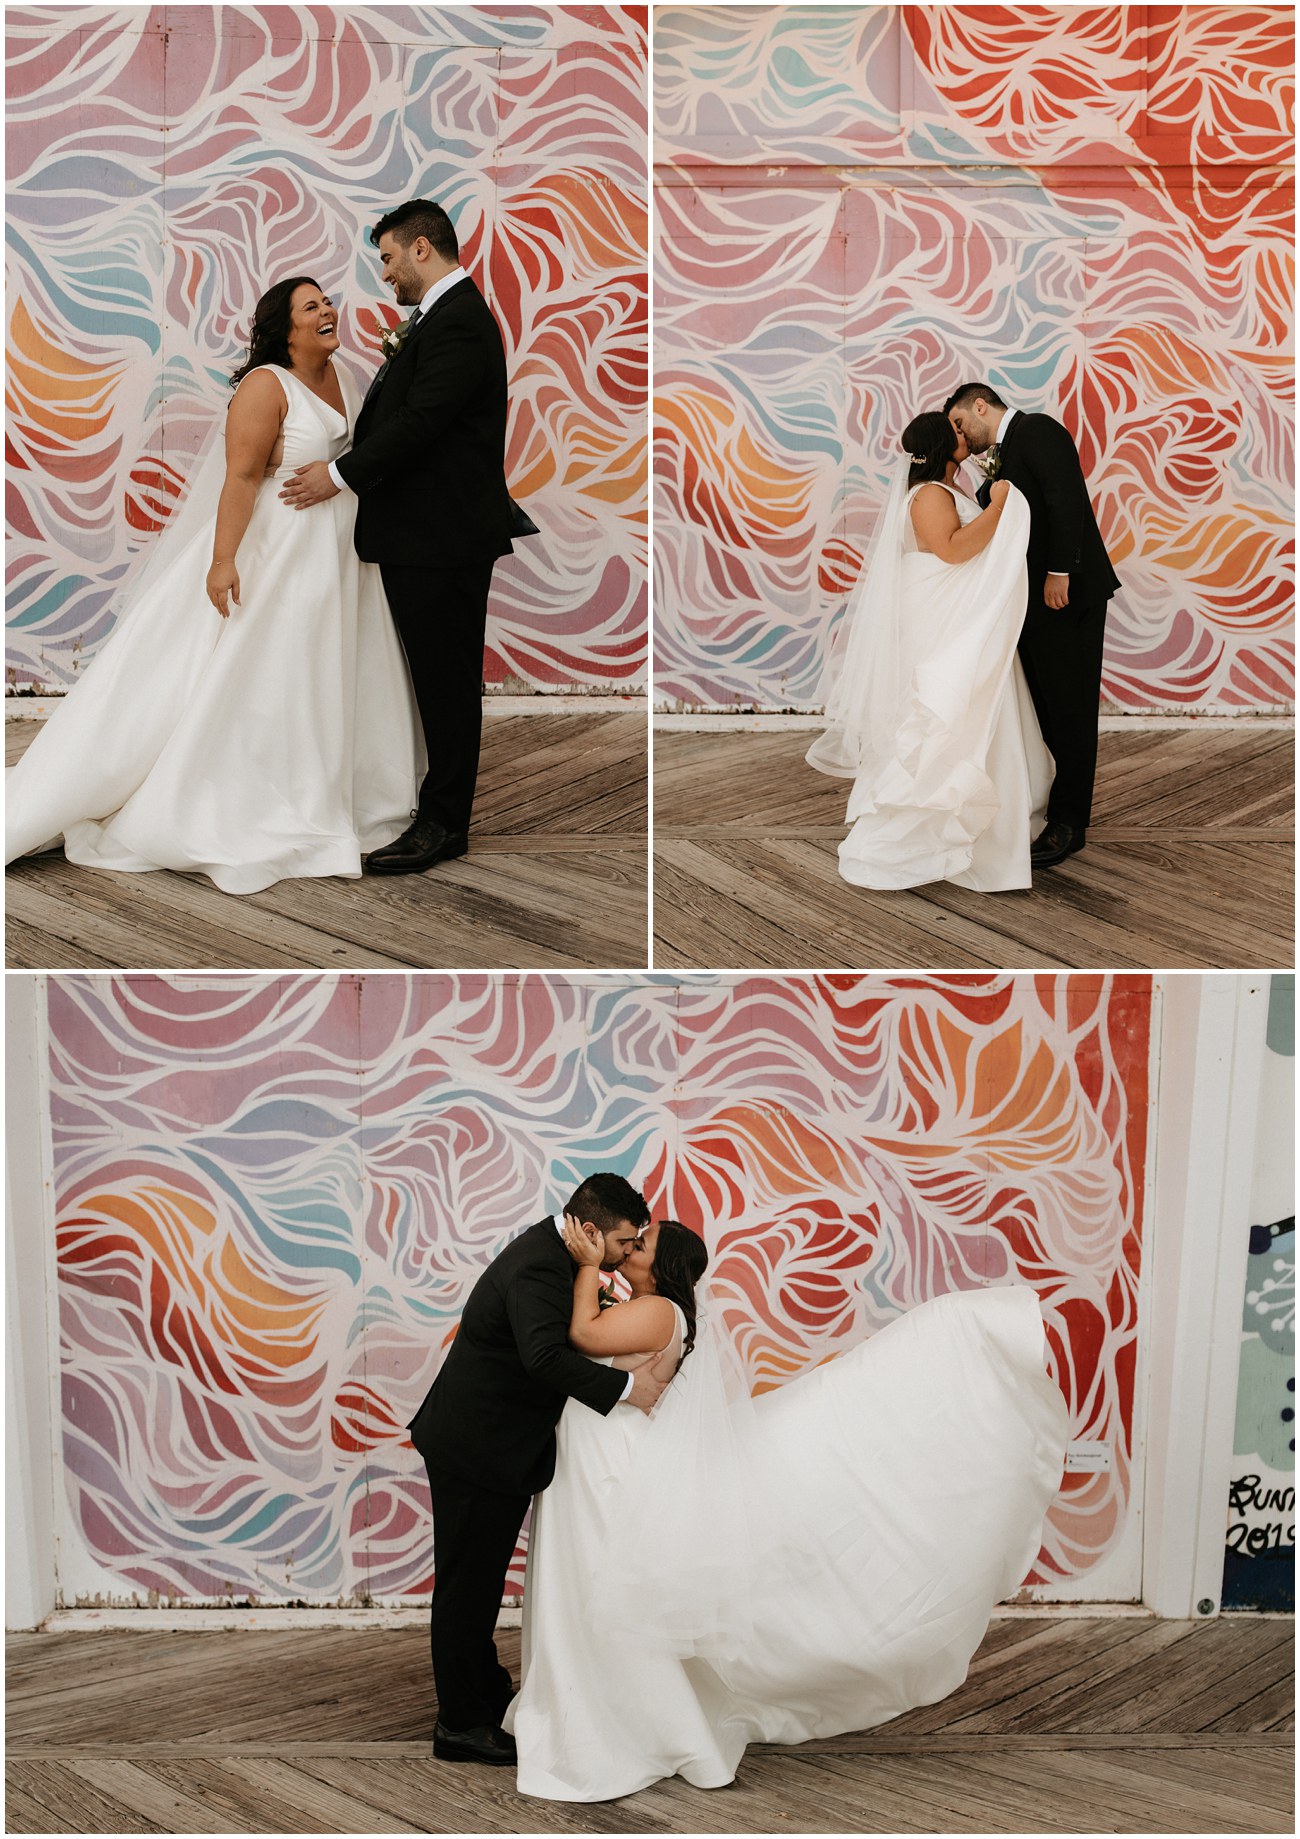 Collage of Bride and Groom posing together in front of colorful wall on the Asbury Park boardwalk